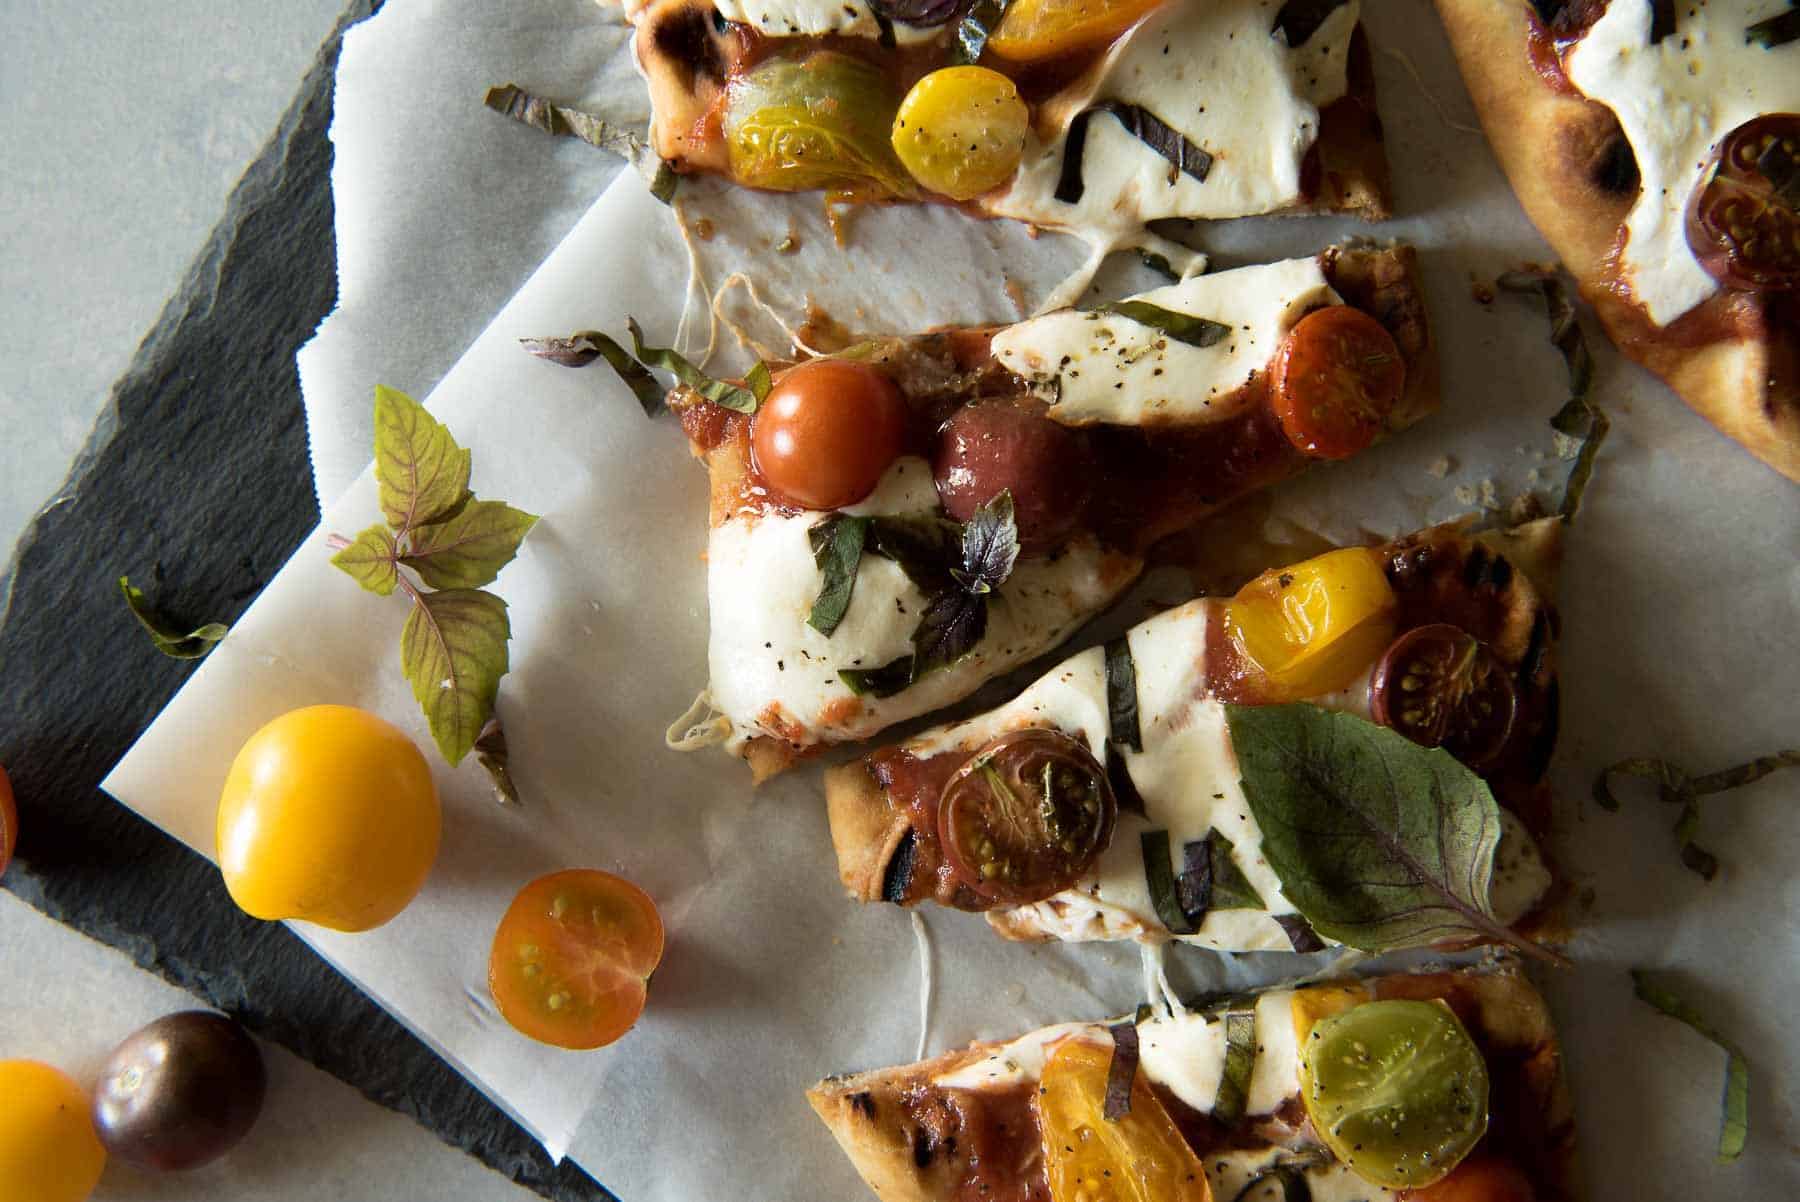 In need of a quick weeknight dinner? This Grilled Margherita Flatbread is all the delicious pizza taste you want with much less work.